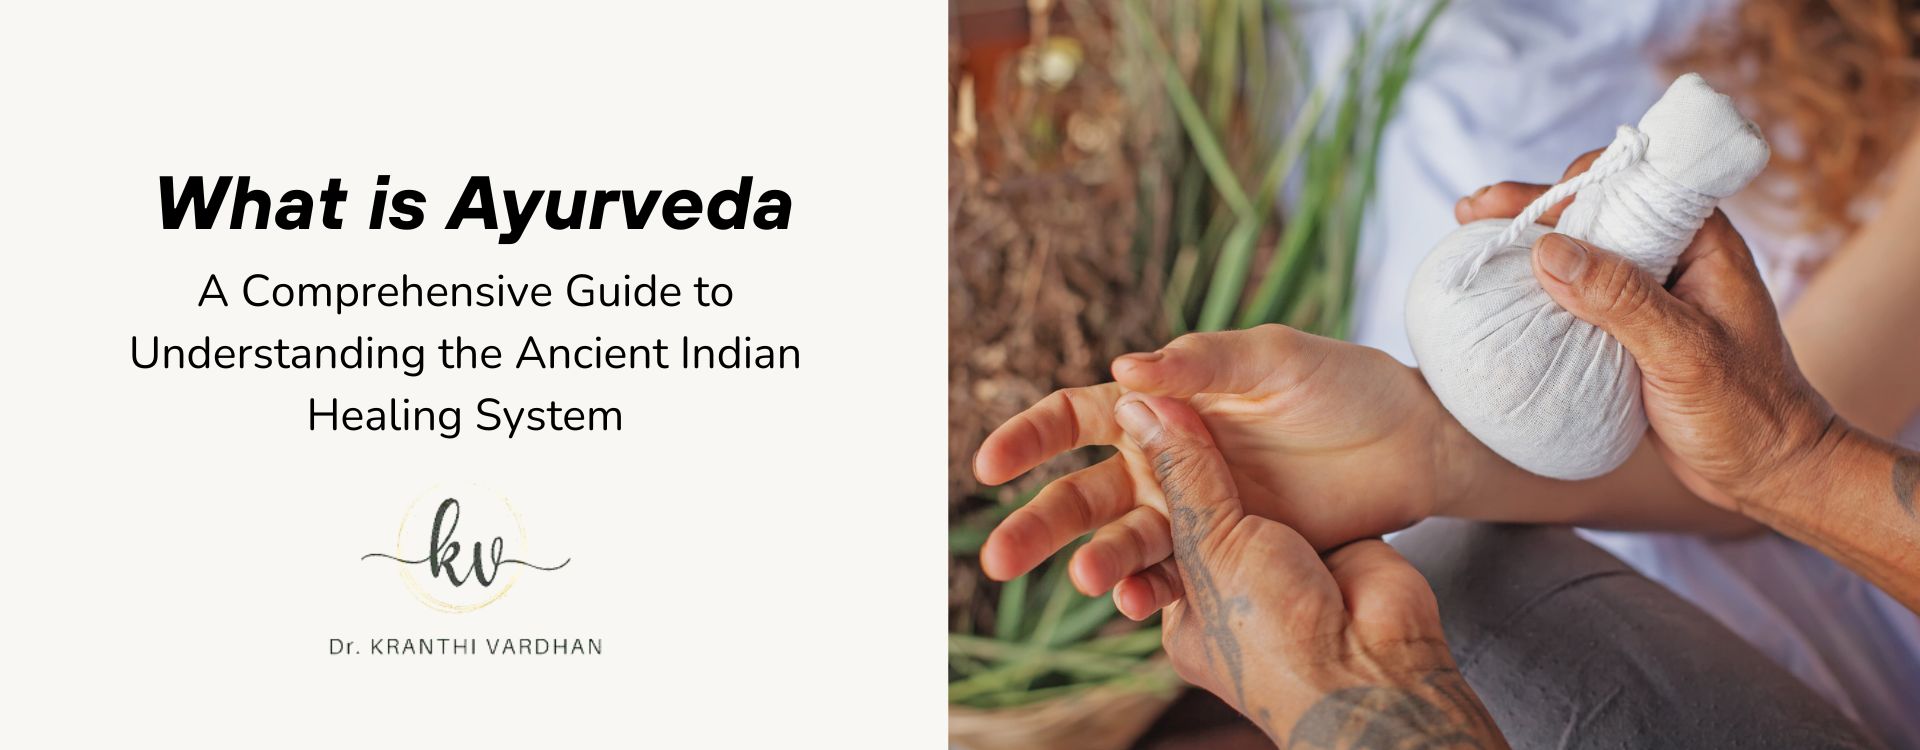 What is Ayurveda? A Comprehensive Guide to Understanding the Ancient Indian Healing System